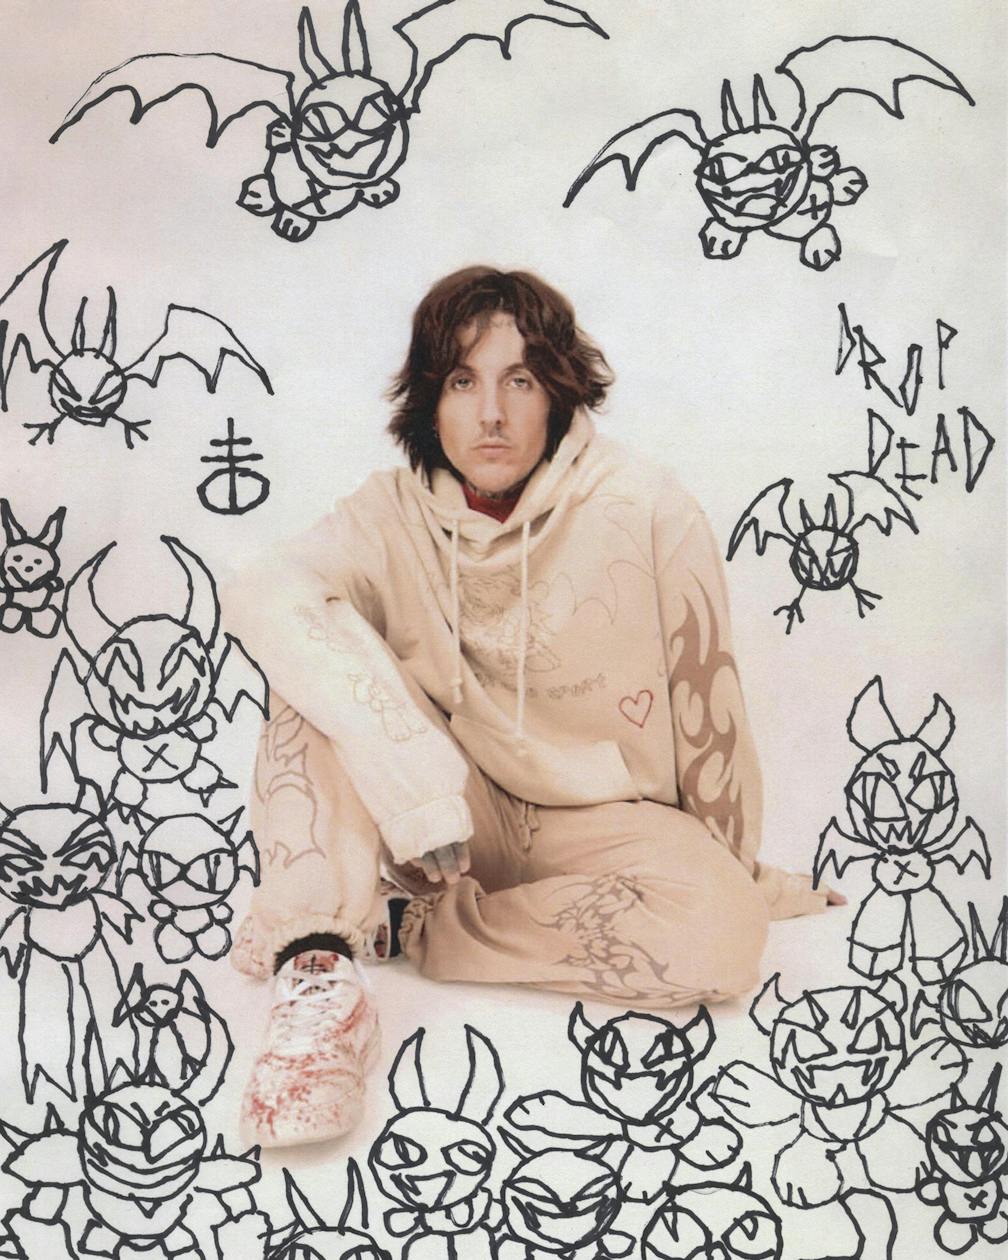 Oli Sykes' clothing brand Drop Dead launches new…